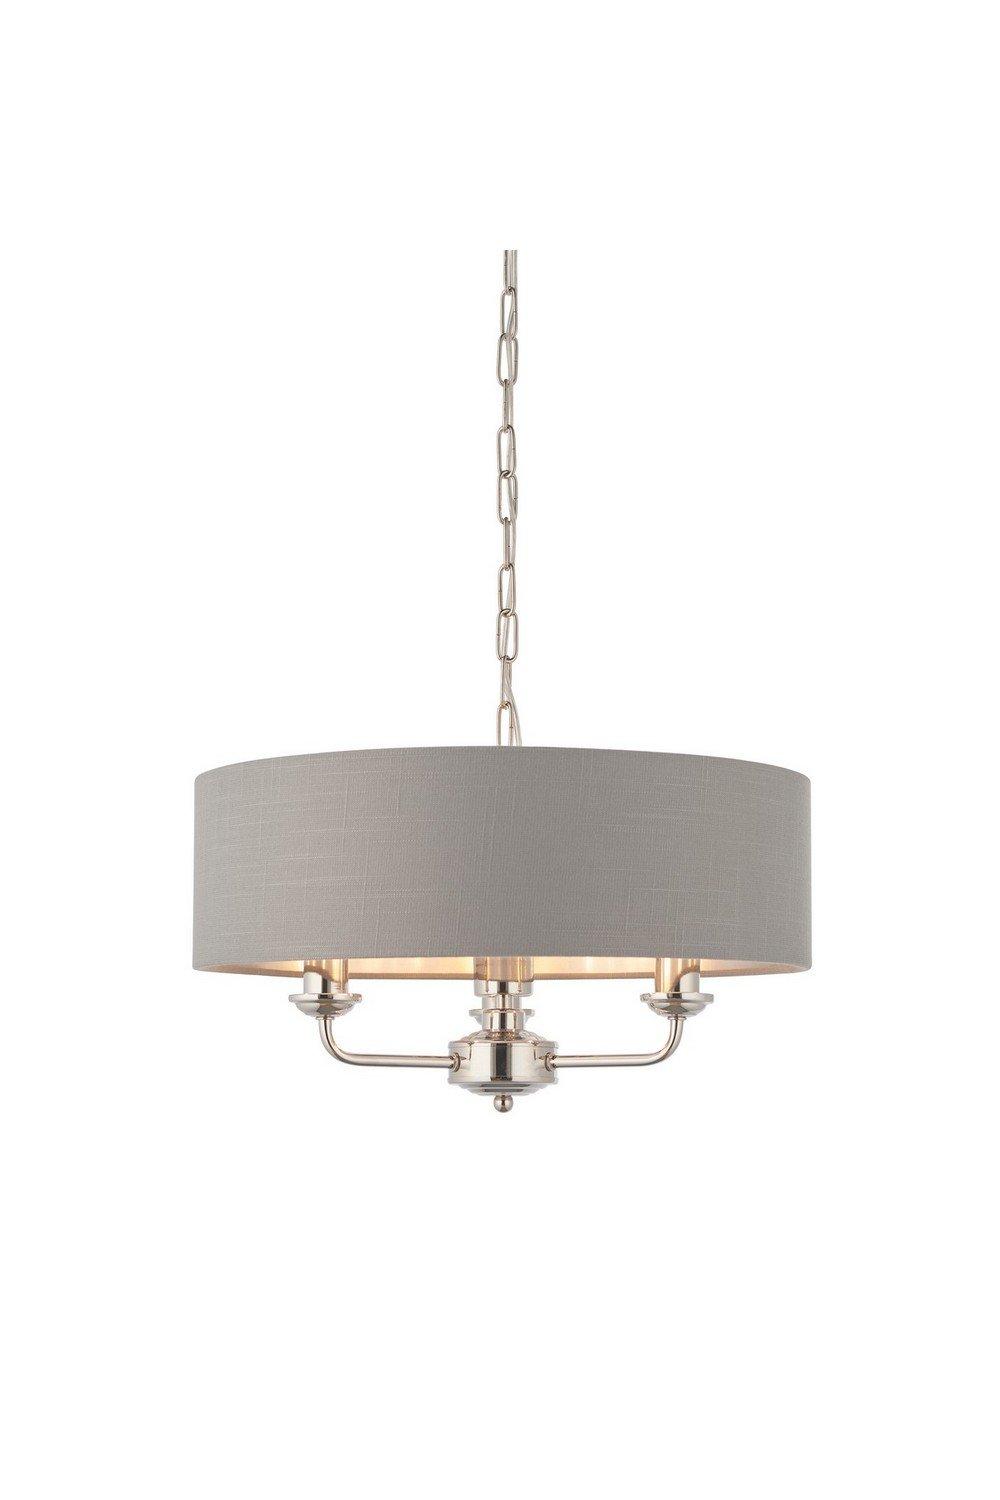 Highclere Cylindrical Pendant Light Bright Nickel Plate Charcoal Fabric